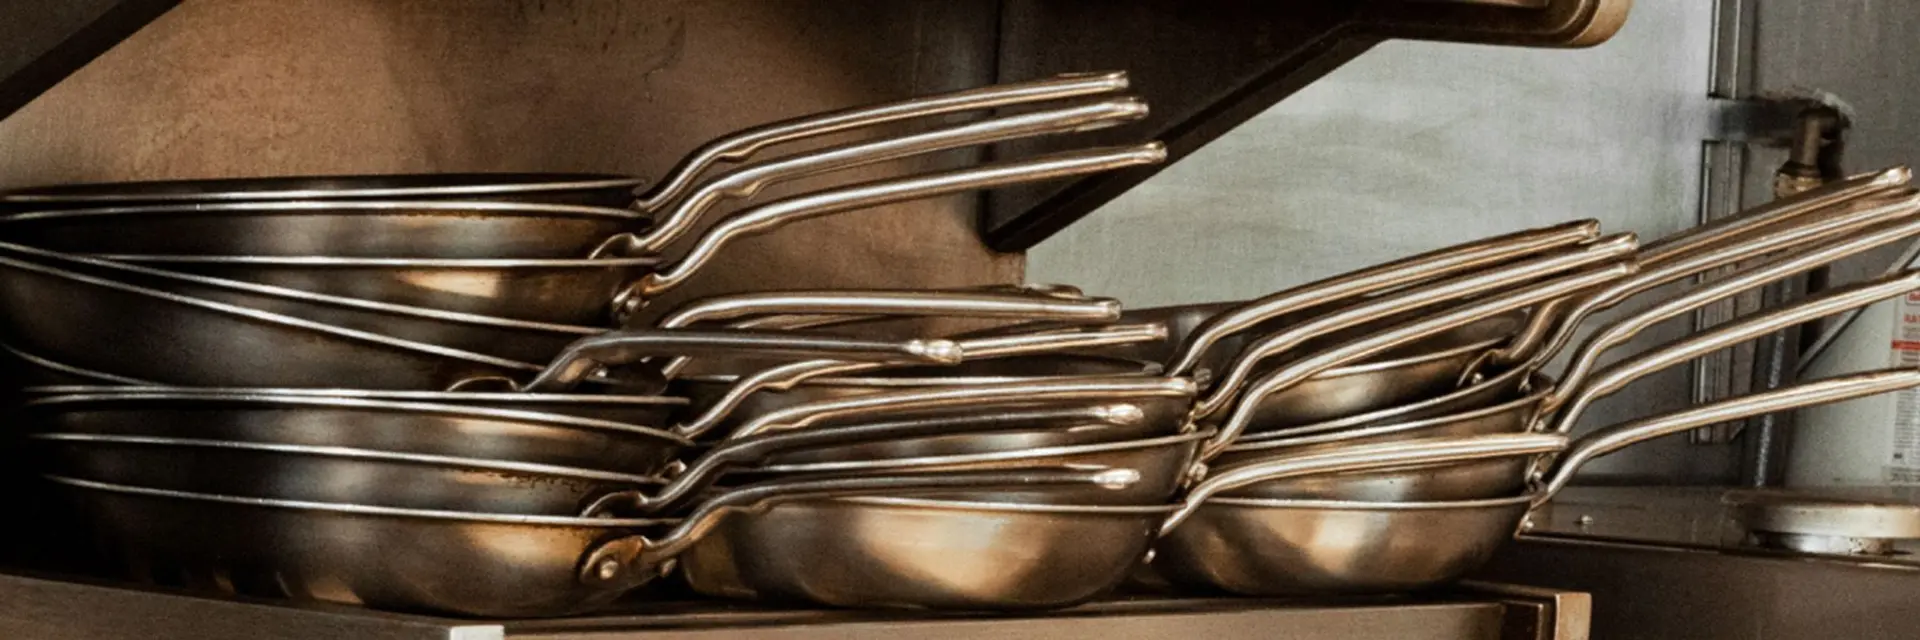 A stack of stainless steel frying pans with metal handles.